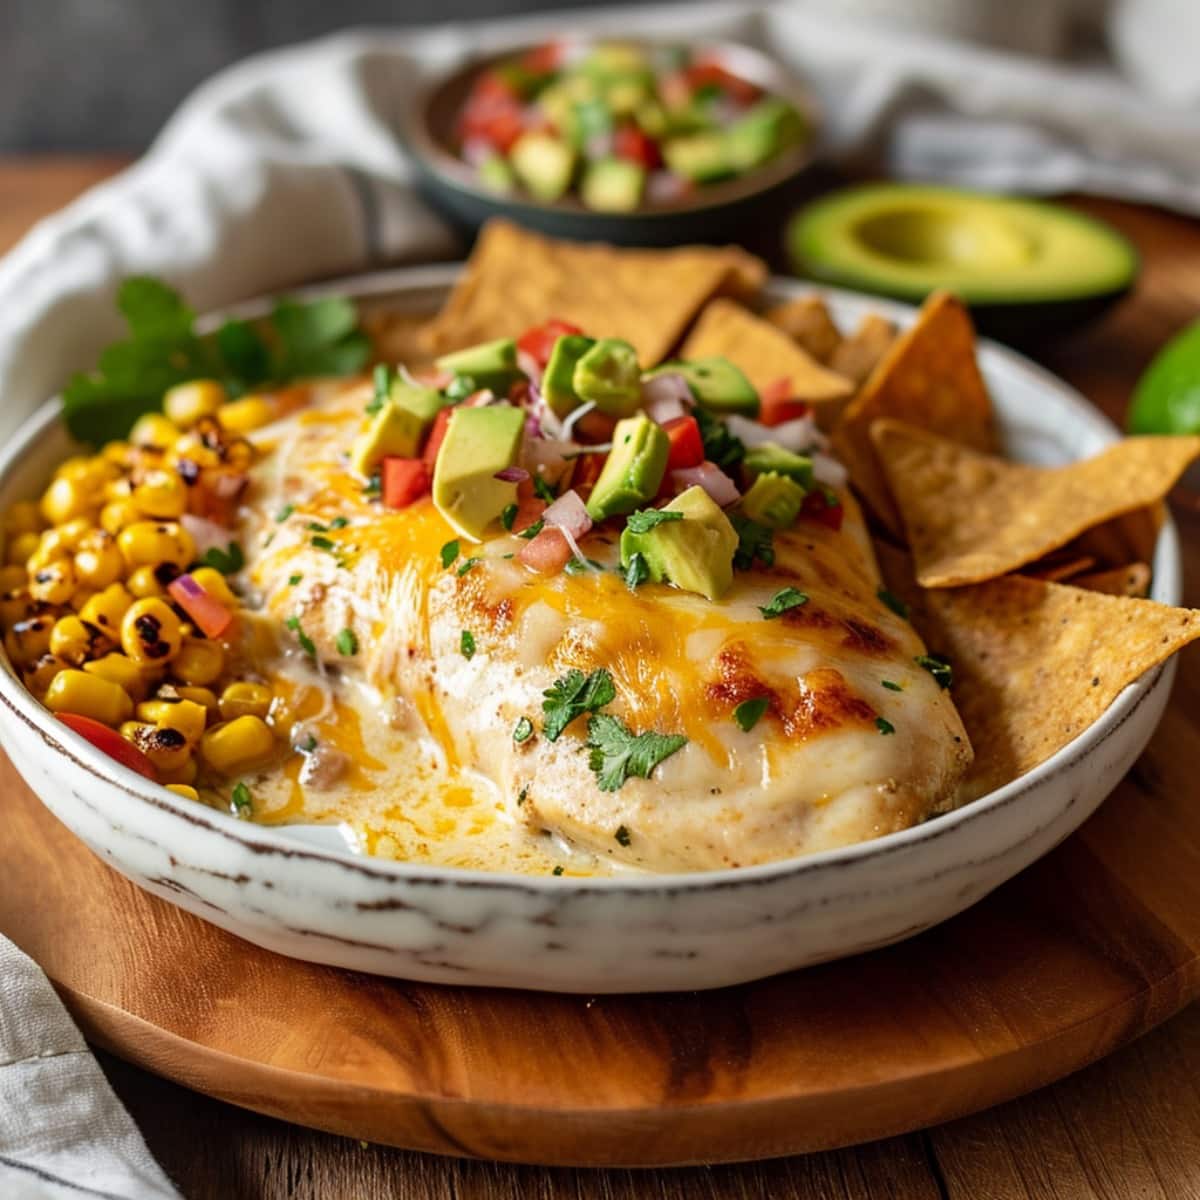 Fiesta Lime Chicken with corn, avocado, and corn chips